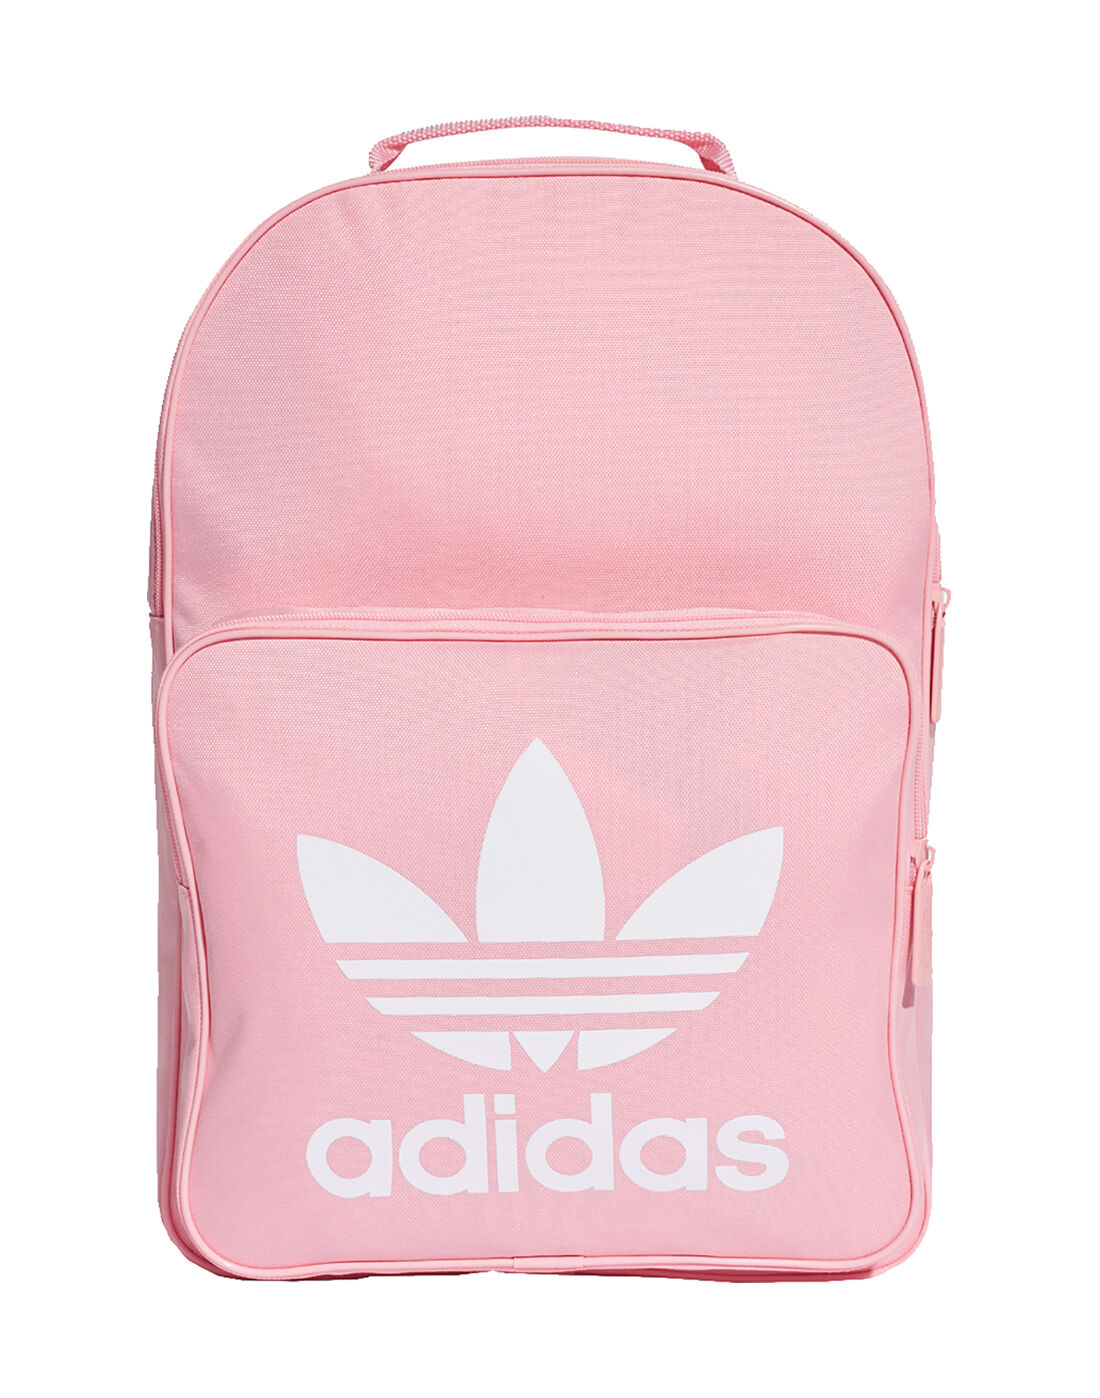 adidas bags for school